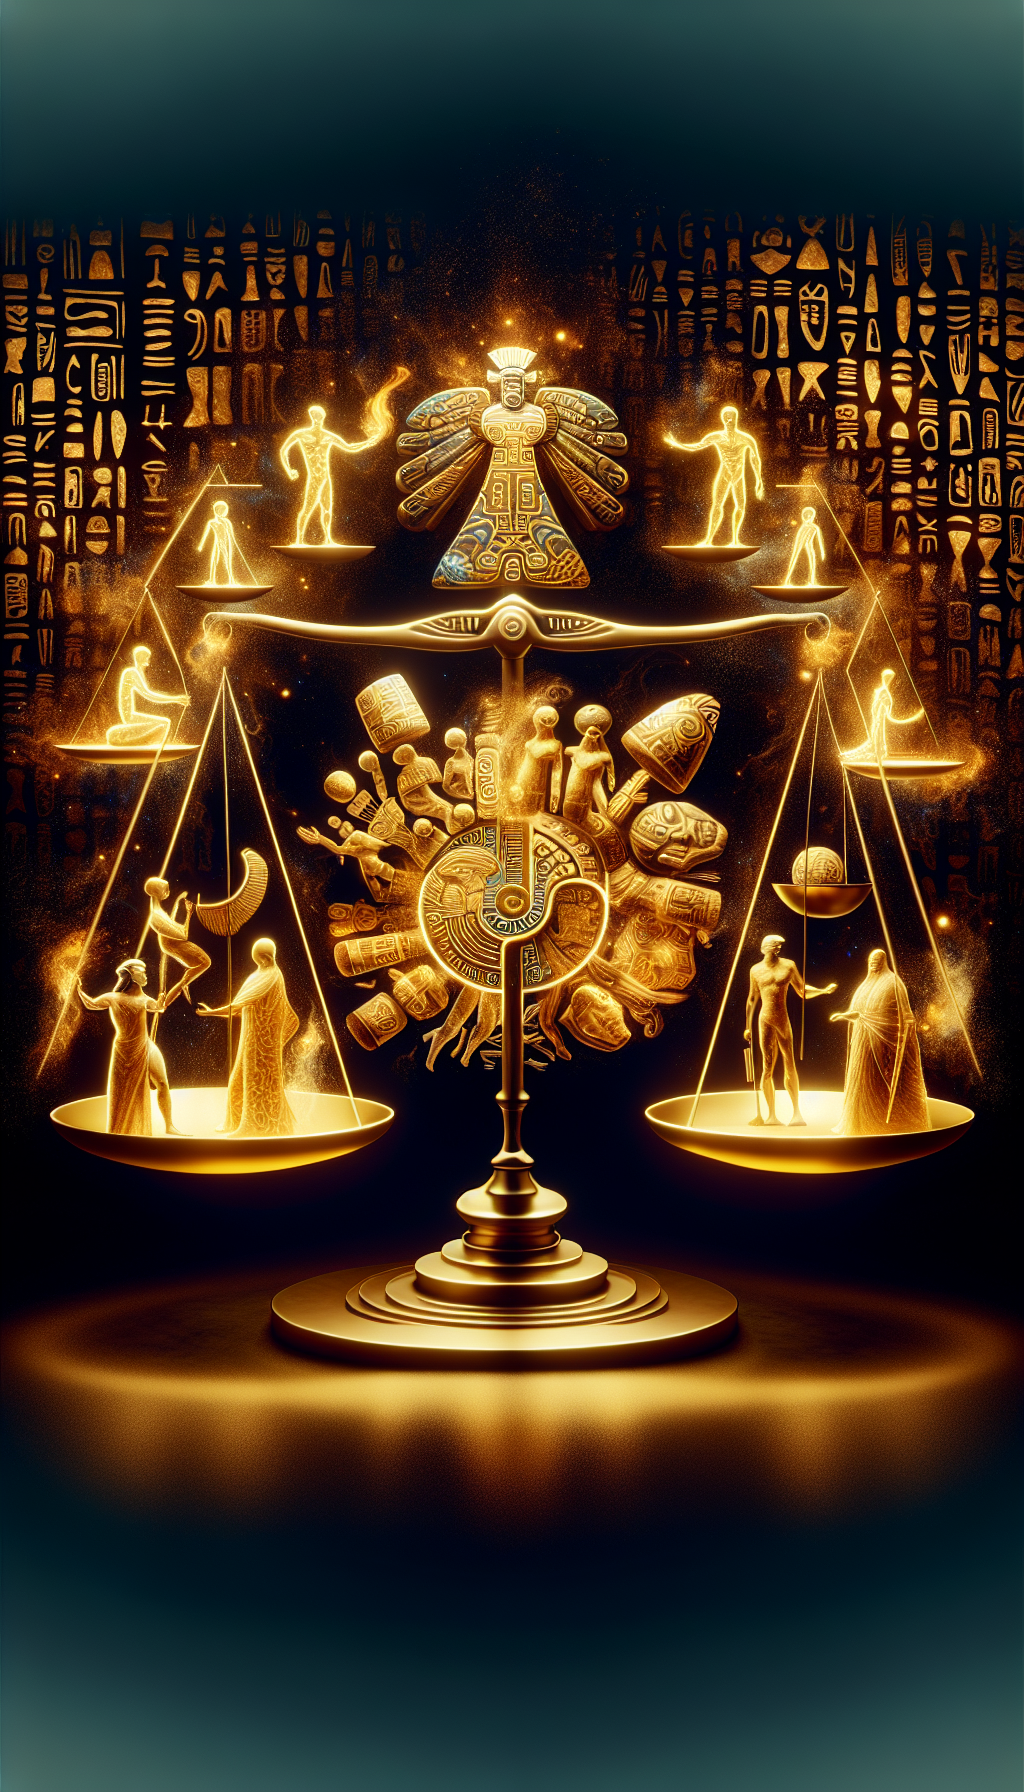 An illustration displays a stylized Pre-Columbian artifact, half gold sculpture, half intricately painted pottery, set against a backdrop of glowing hieroglyphic script. From the artifact's core, ghostly figures emerge, representing the civilization's cultural essence—artisans, warriors, and scholars—encircling a balance scale that tips towards intangible heritage, symbolizing the true value of Pre-Columbian art beyond material wealth.